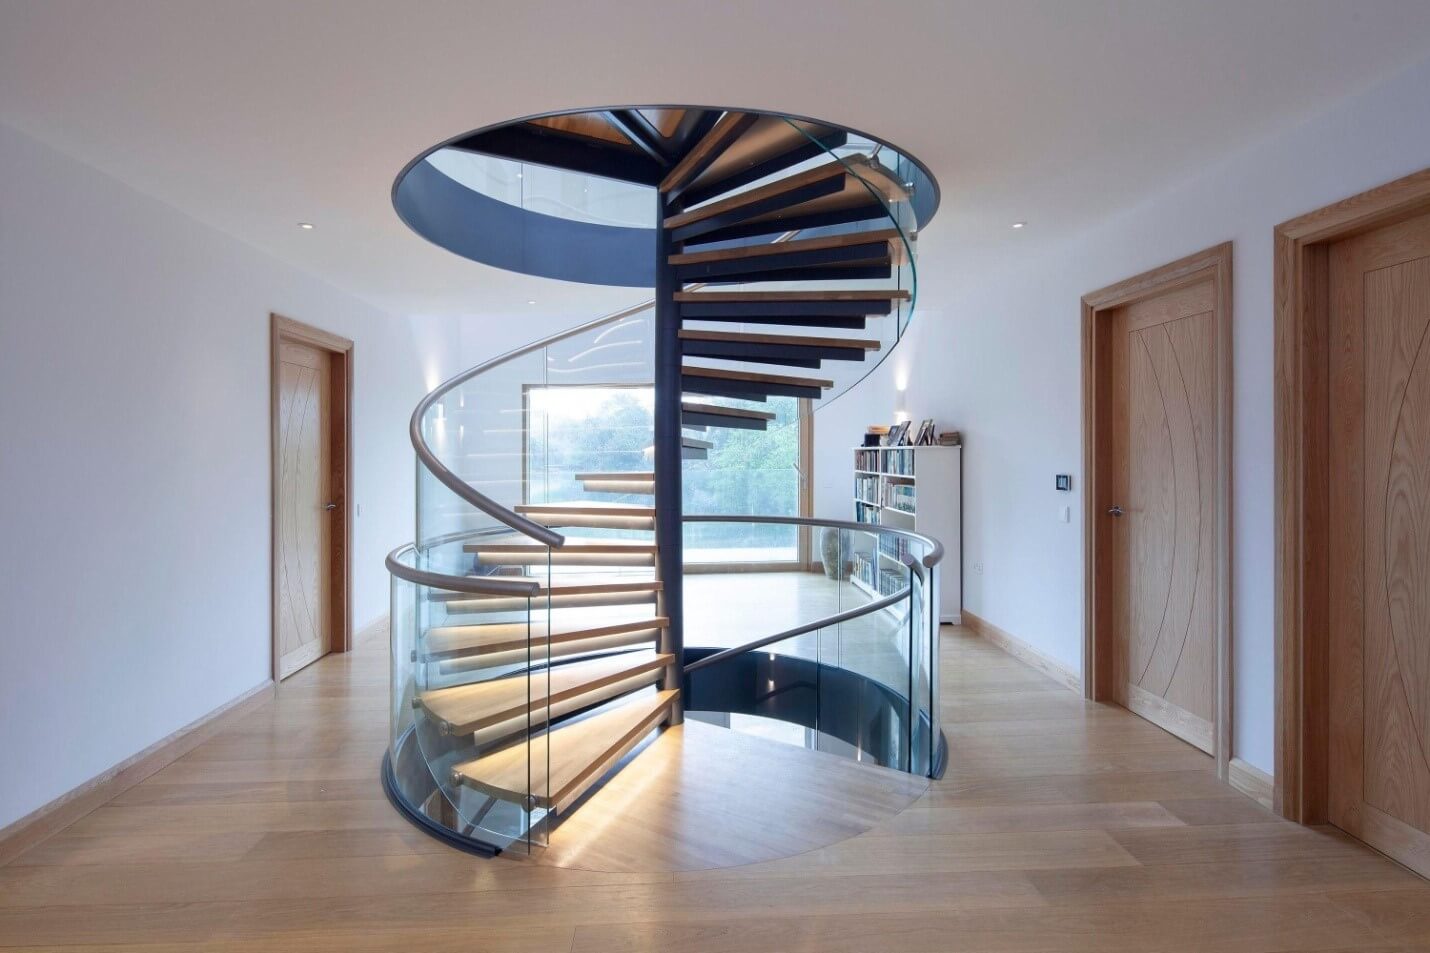 Stunning Collection of Over 999 Staircase Images in Full 4K Resolution